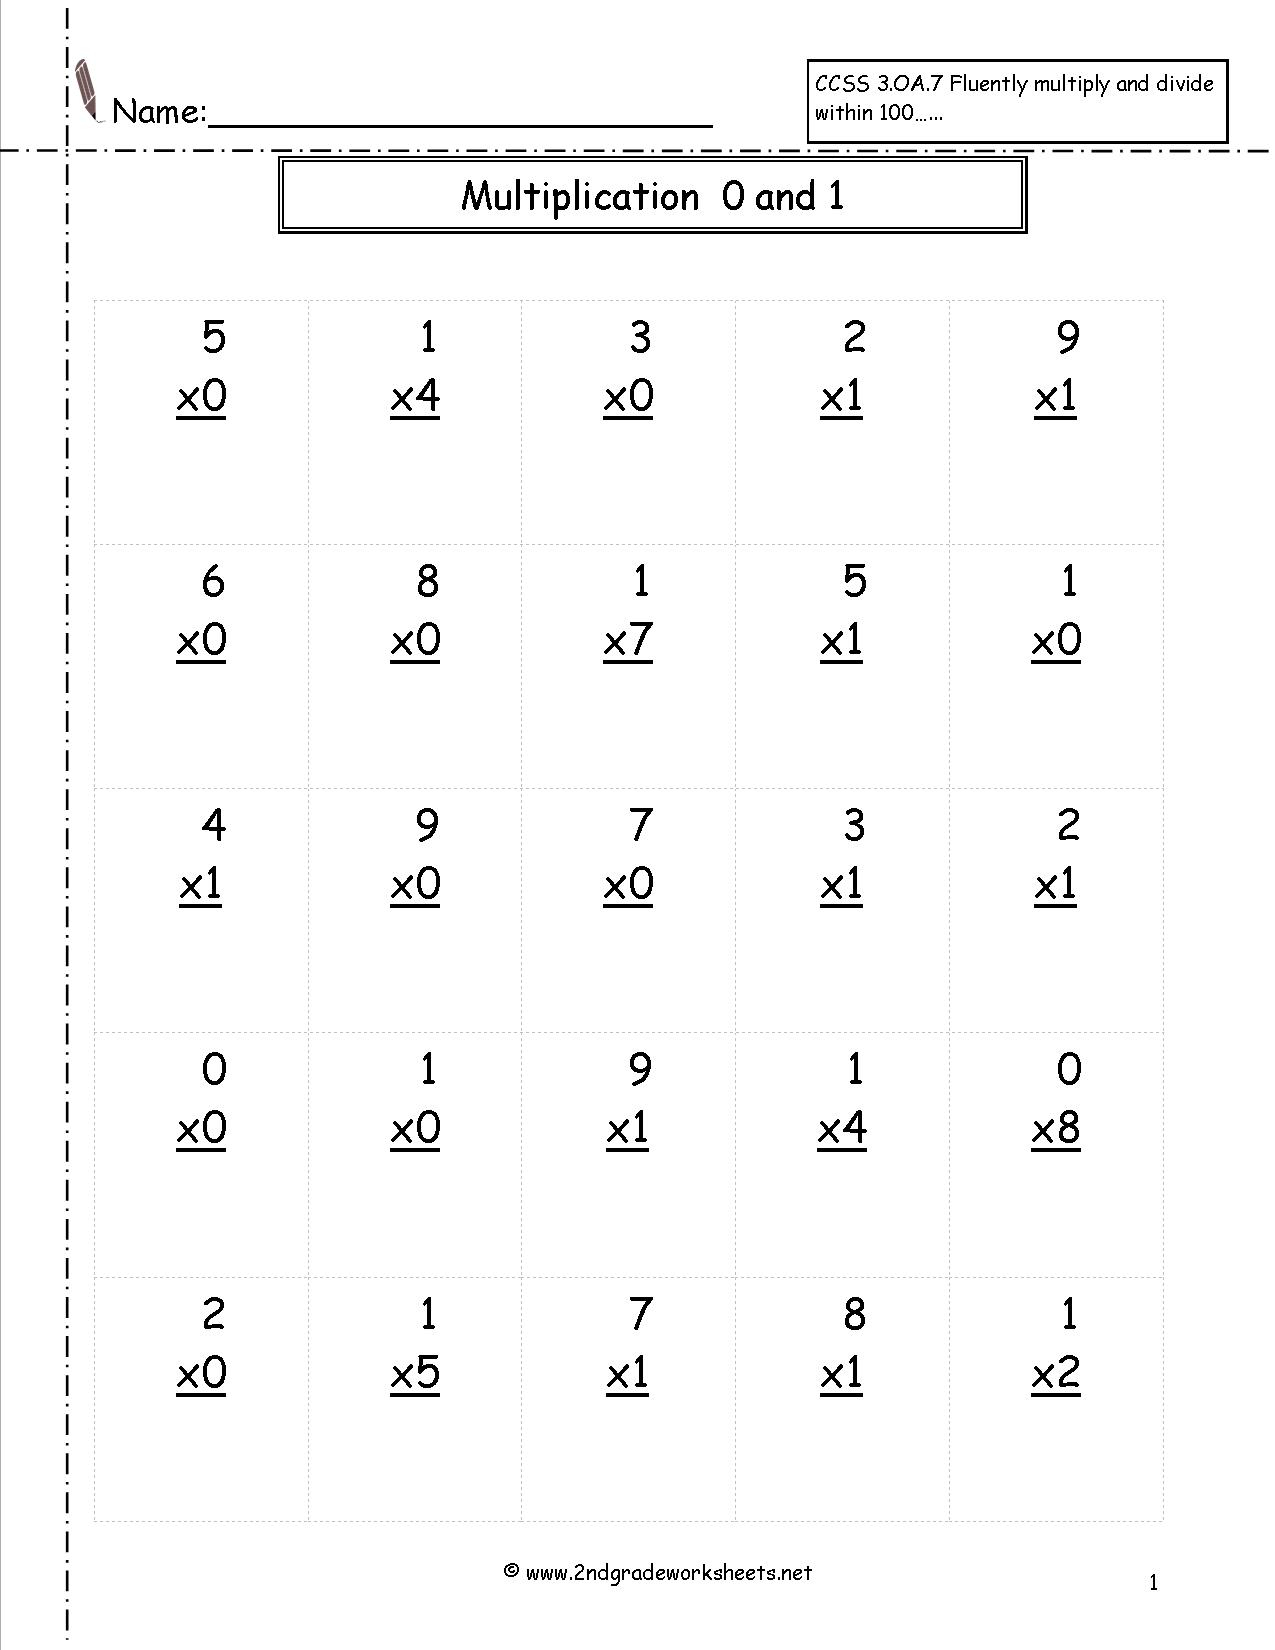 Multiplication Worksheets And Printouts - Free Printable Math Worksheets For 2Nd Grade